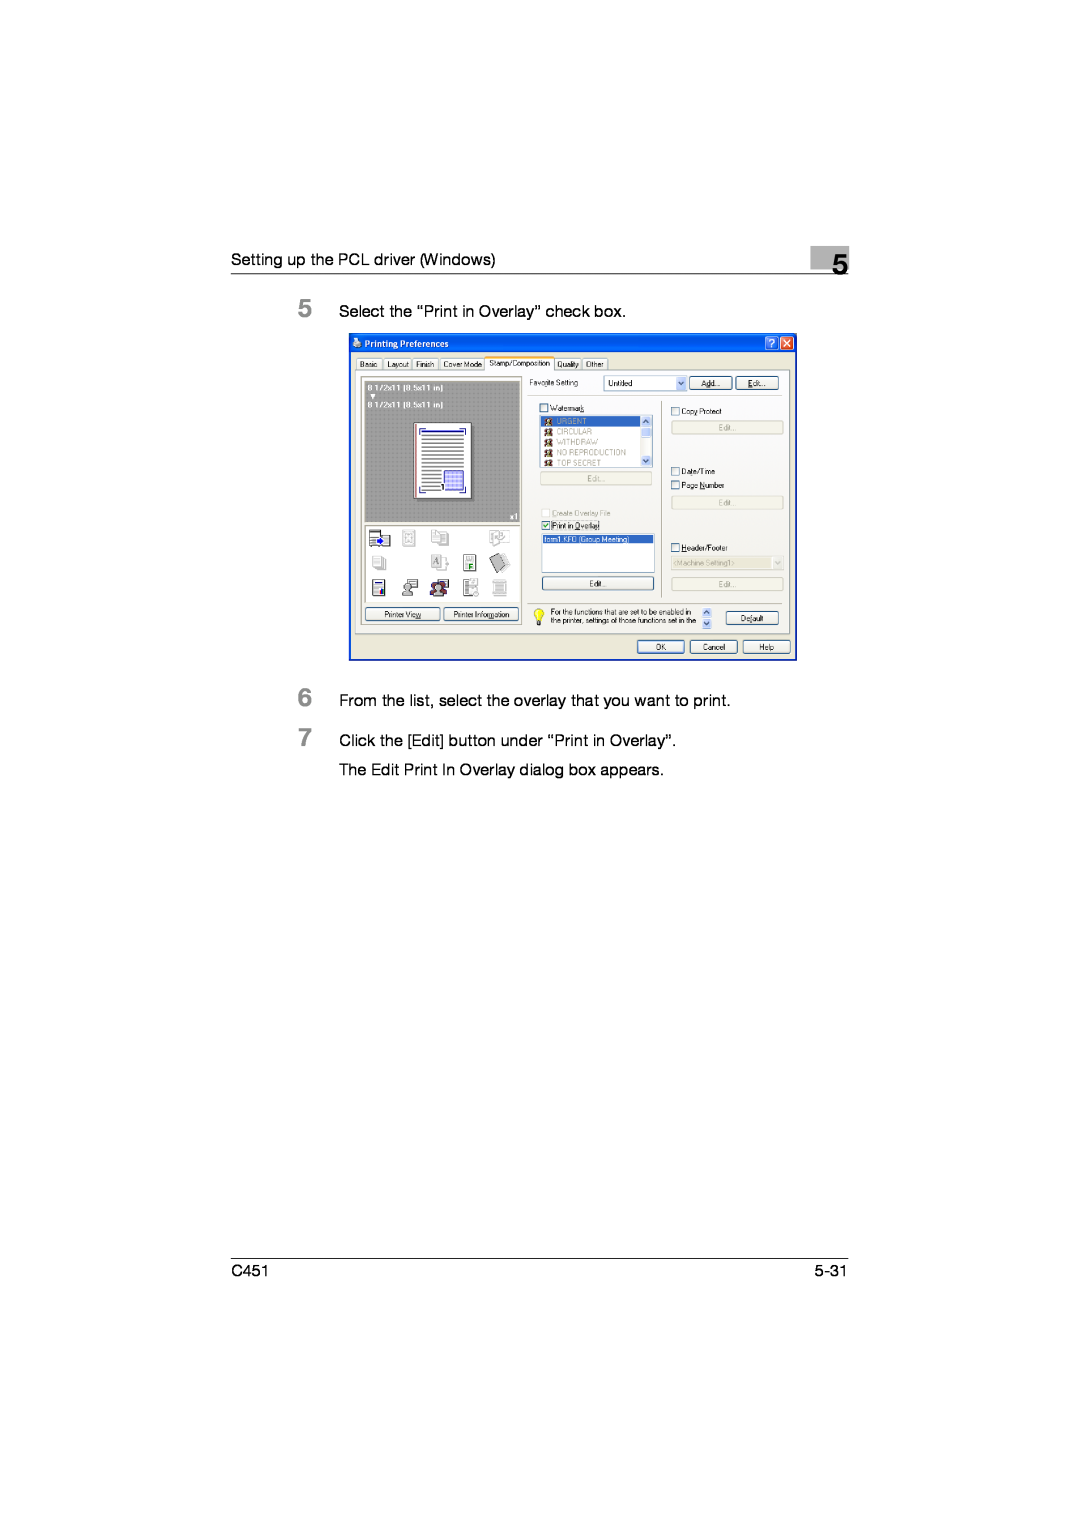 Konica Minolta C451 manual Setting up the PCL driver Windows, Select the “Print in Overlay” check box, 5-31 